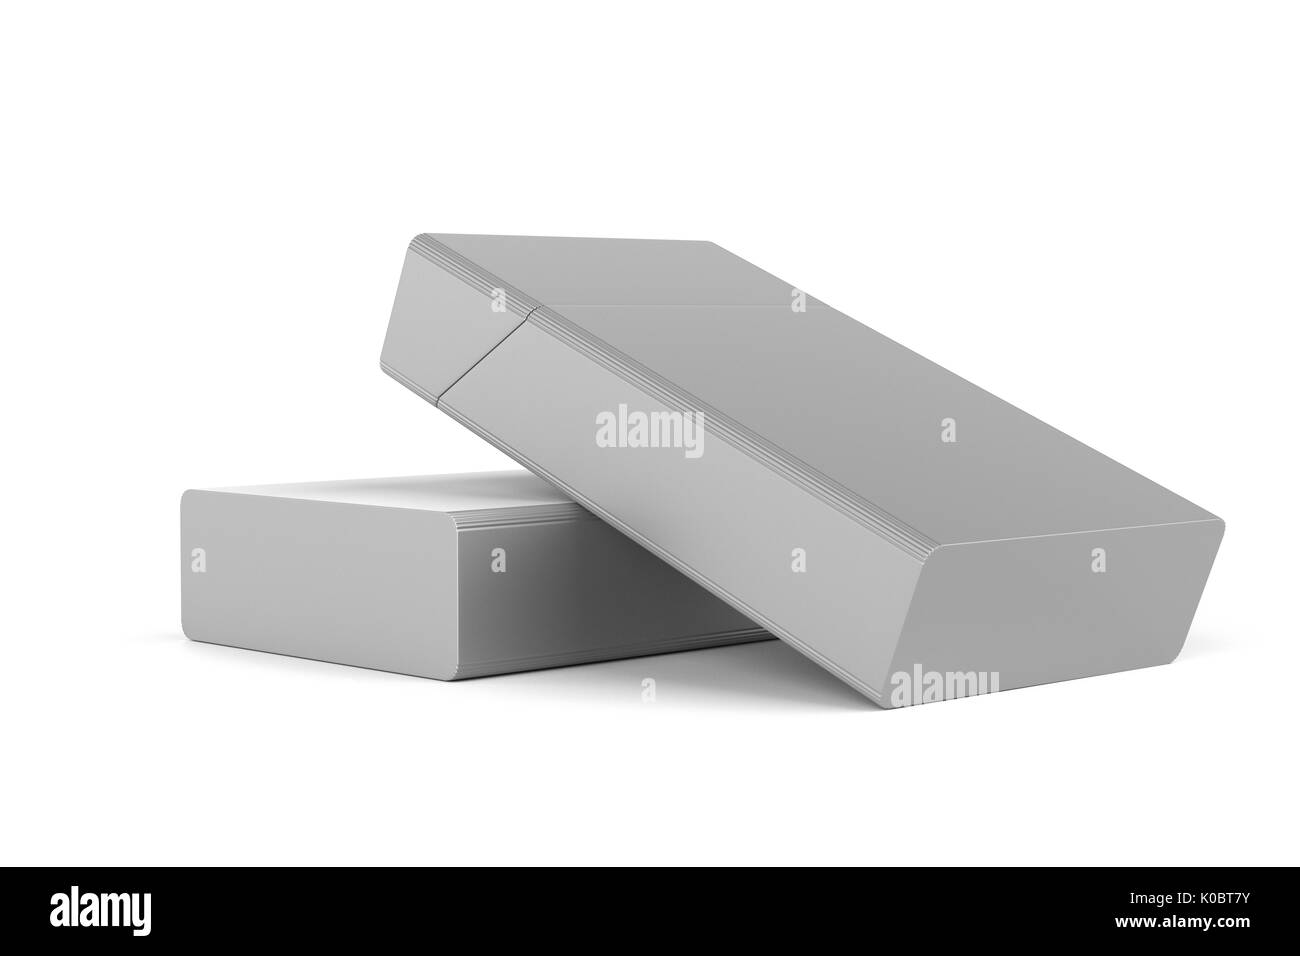 3D render composition of two king size rounded cigarette boxes or packs on a white background with shadow. Clipping path. Template for your design. Stock Photo